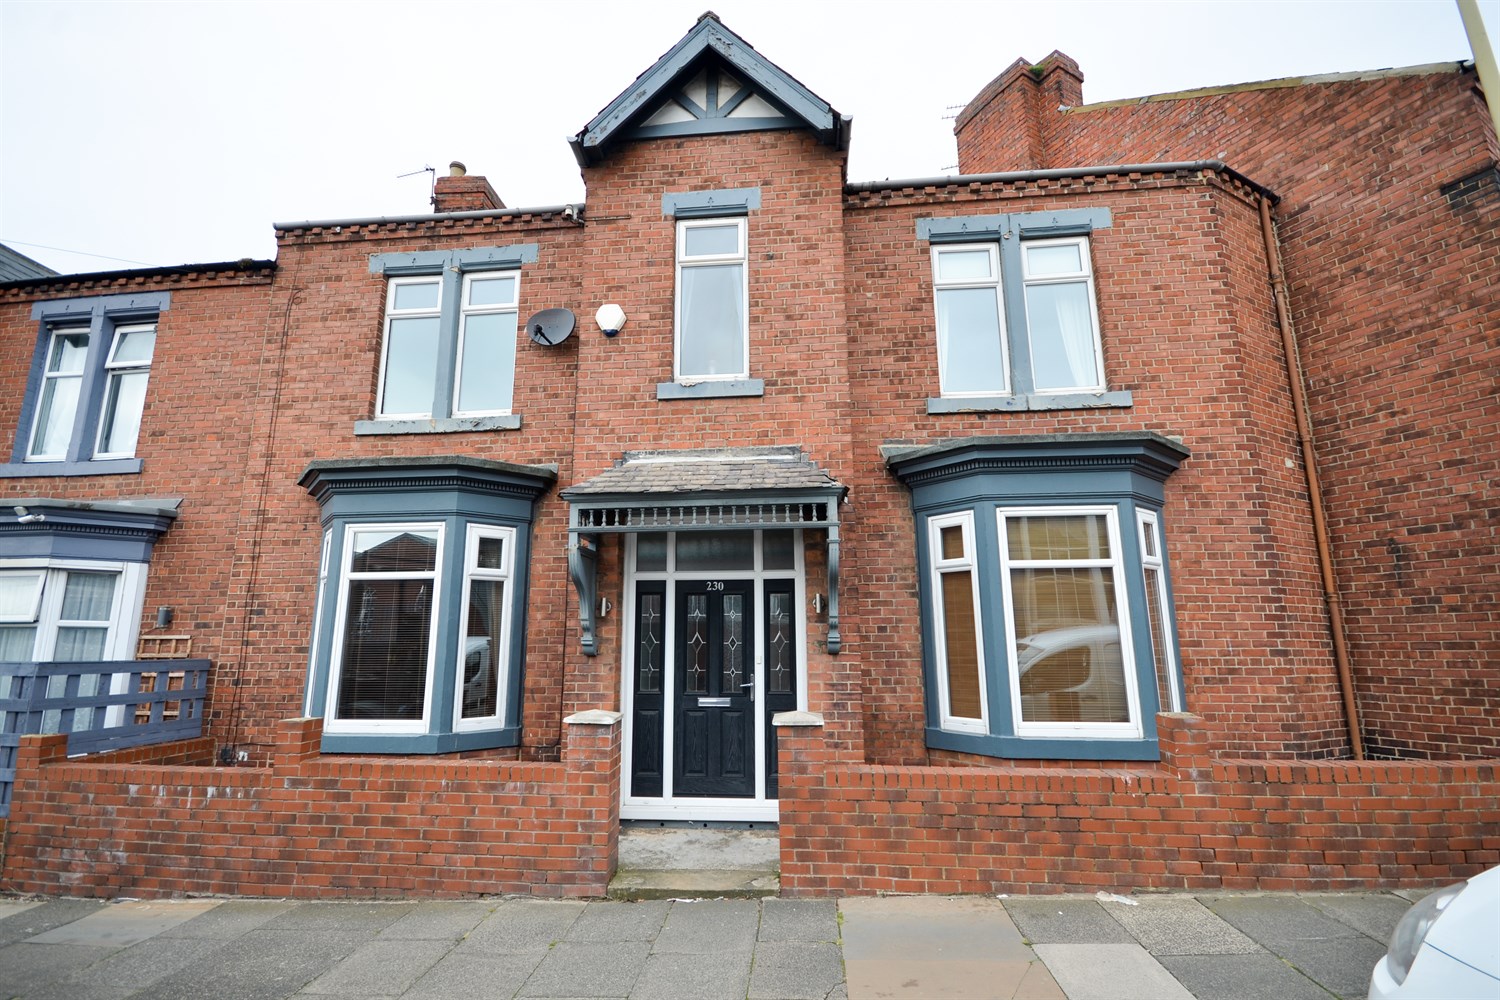 3 bed house for sale in Dean Road, South Shields - Property Image 1